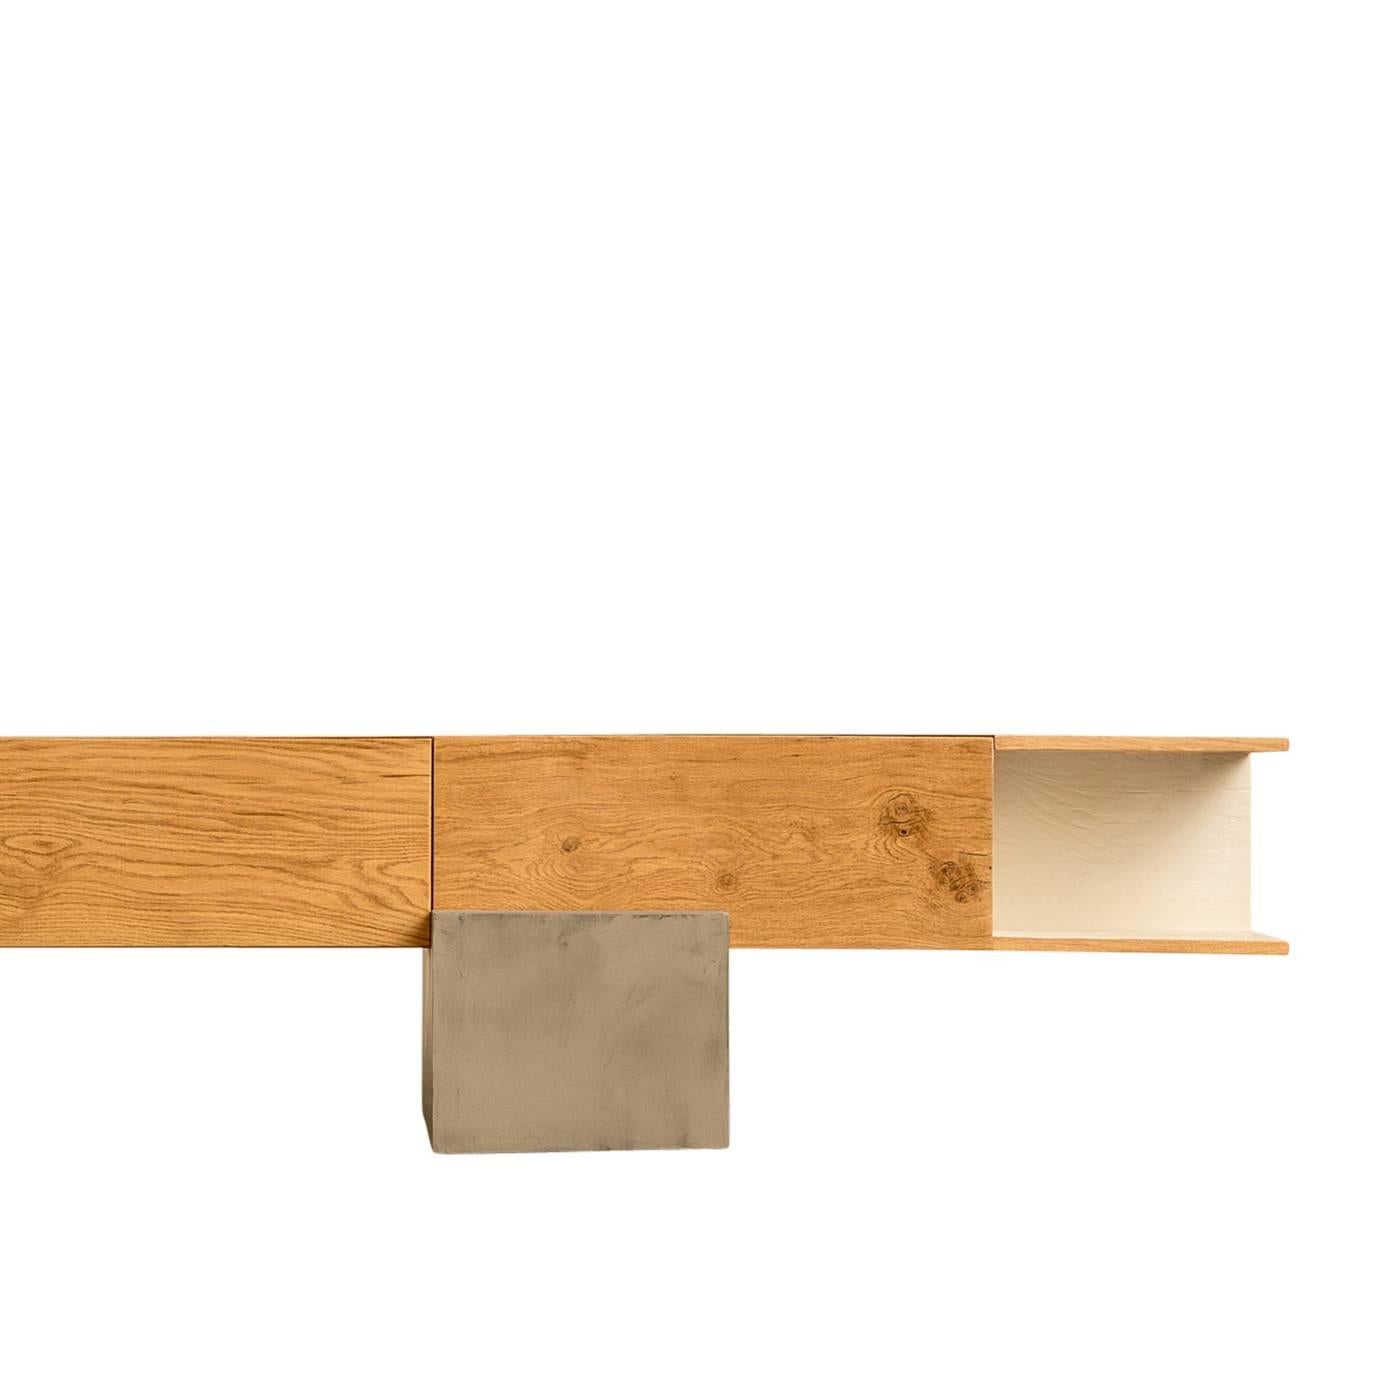 This well crafted oak beam storage unit by Giacomo Moor balances on an off centre concrete support. The cabinet has three closed compartments. Two doors fold downward, and one folds upward, and an additional storage shelf has a white varnished